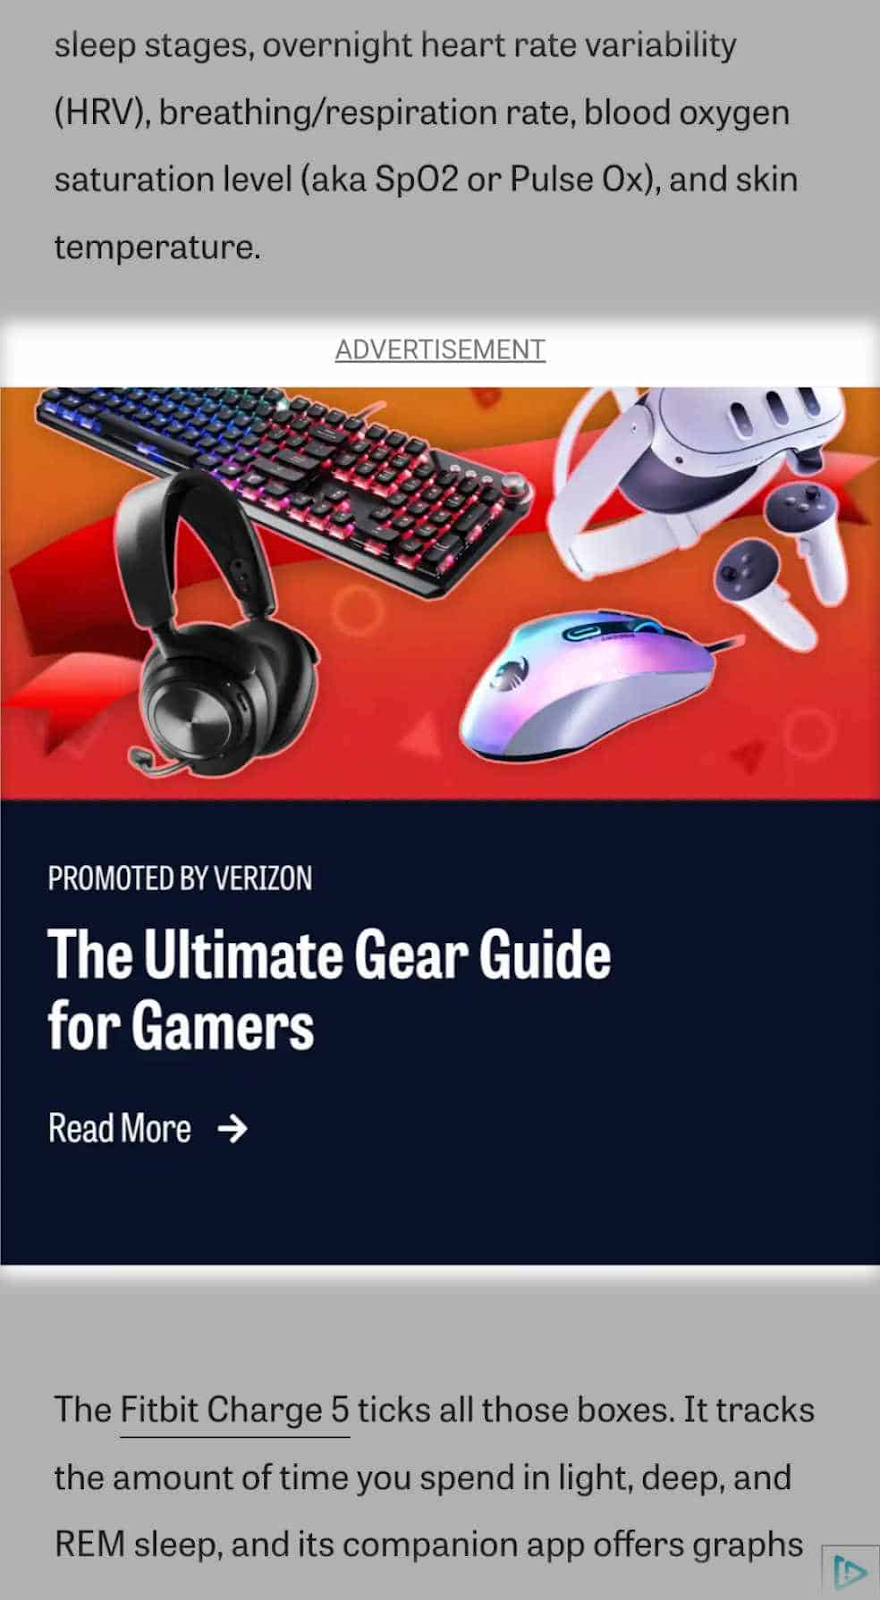 PCMag's mobile banner ad in the middle of page's content